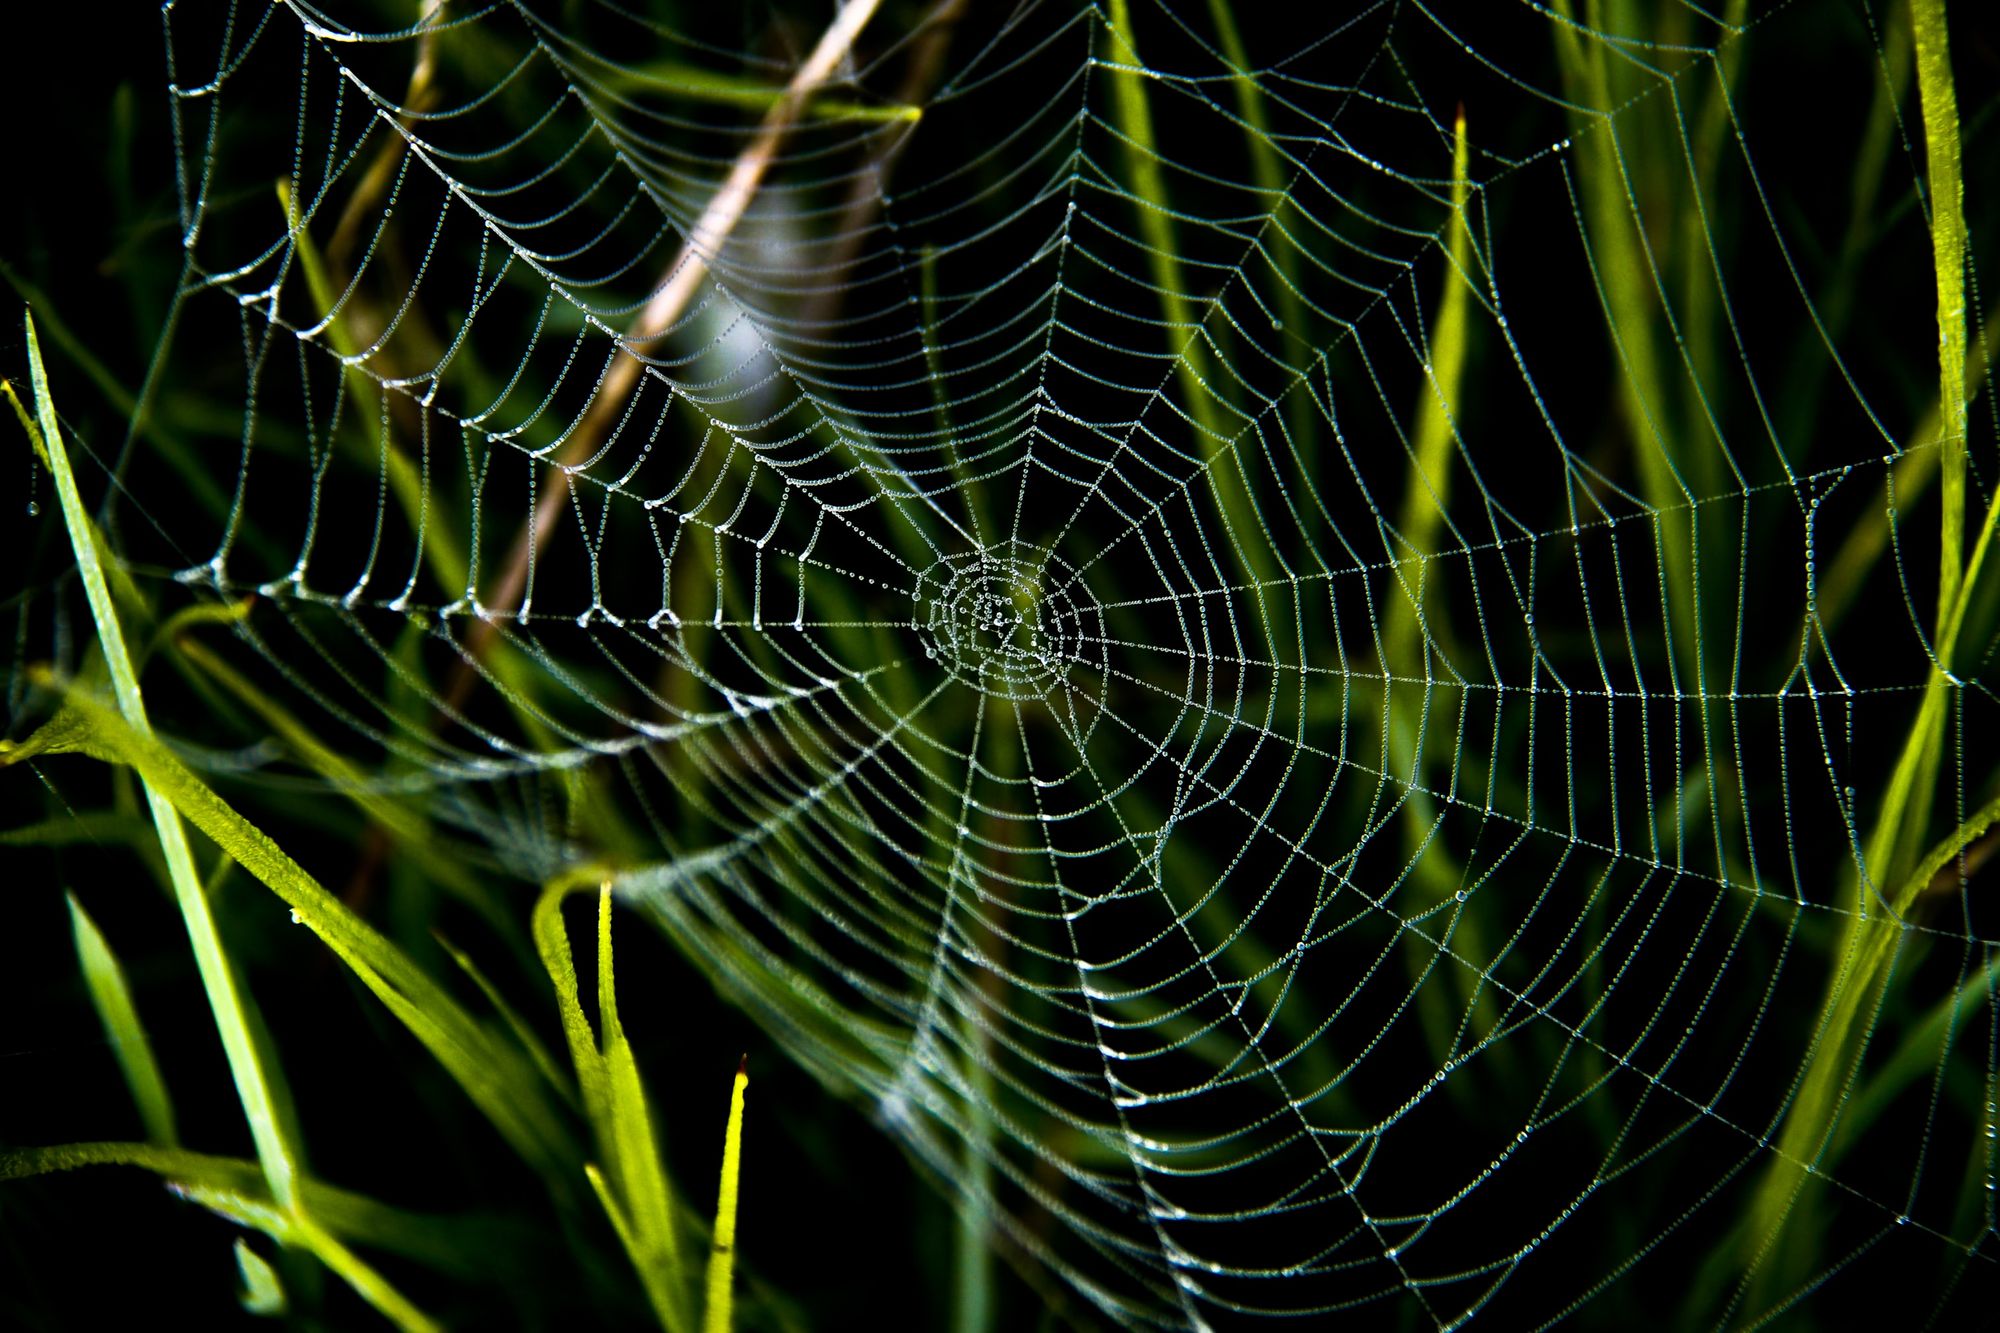 Spider web strung across grass leaves.